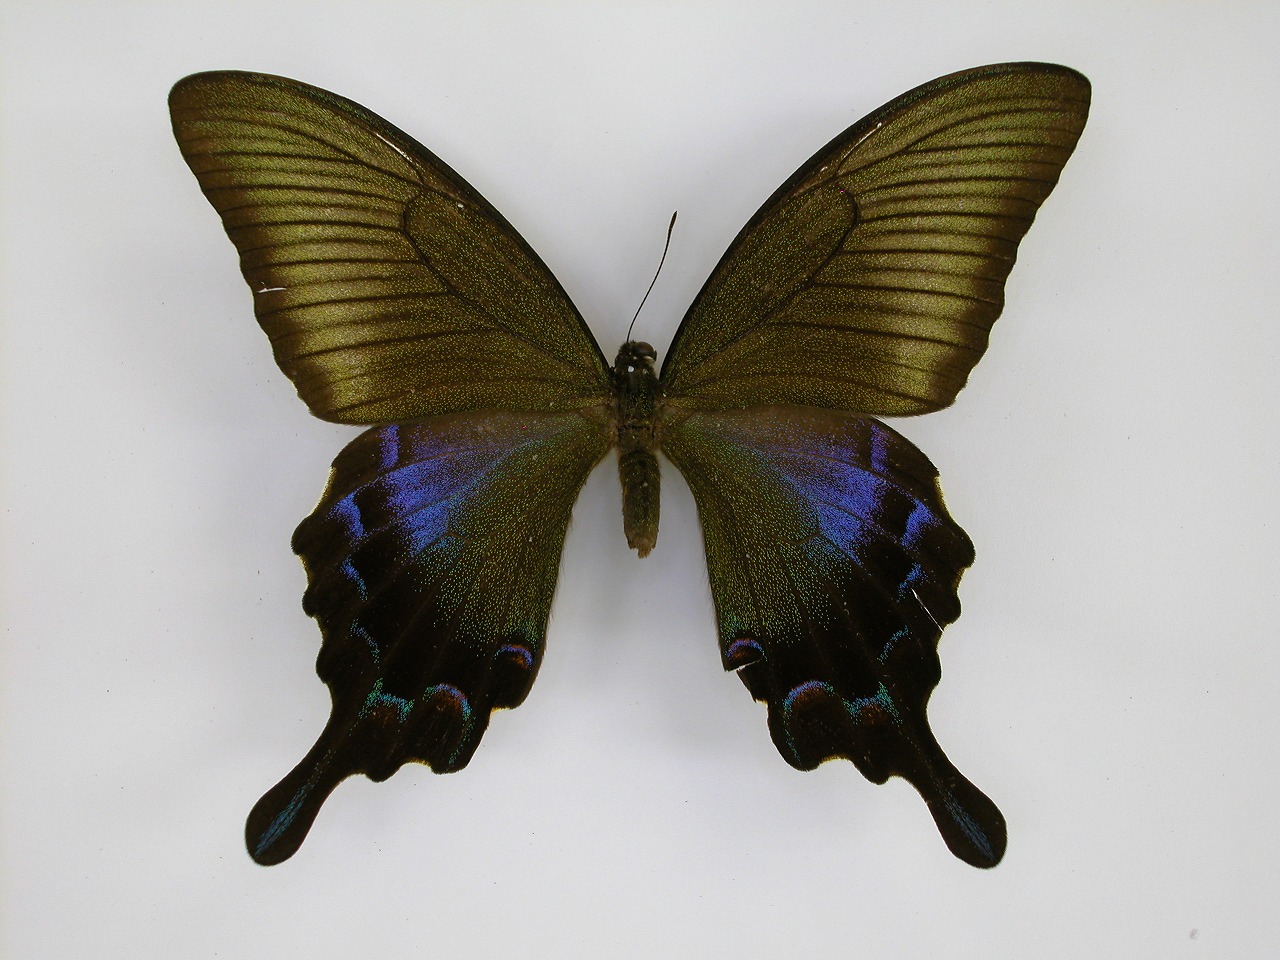 https://www.hitohaku.jp/material/l-material/butterfly-wing/1-papilionidae/B1-269818_A.jpg